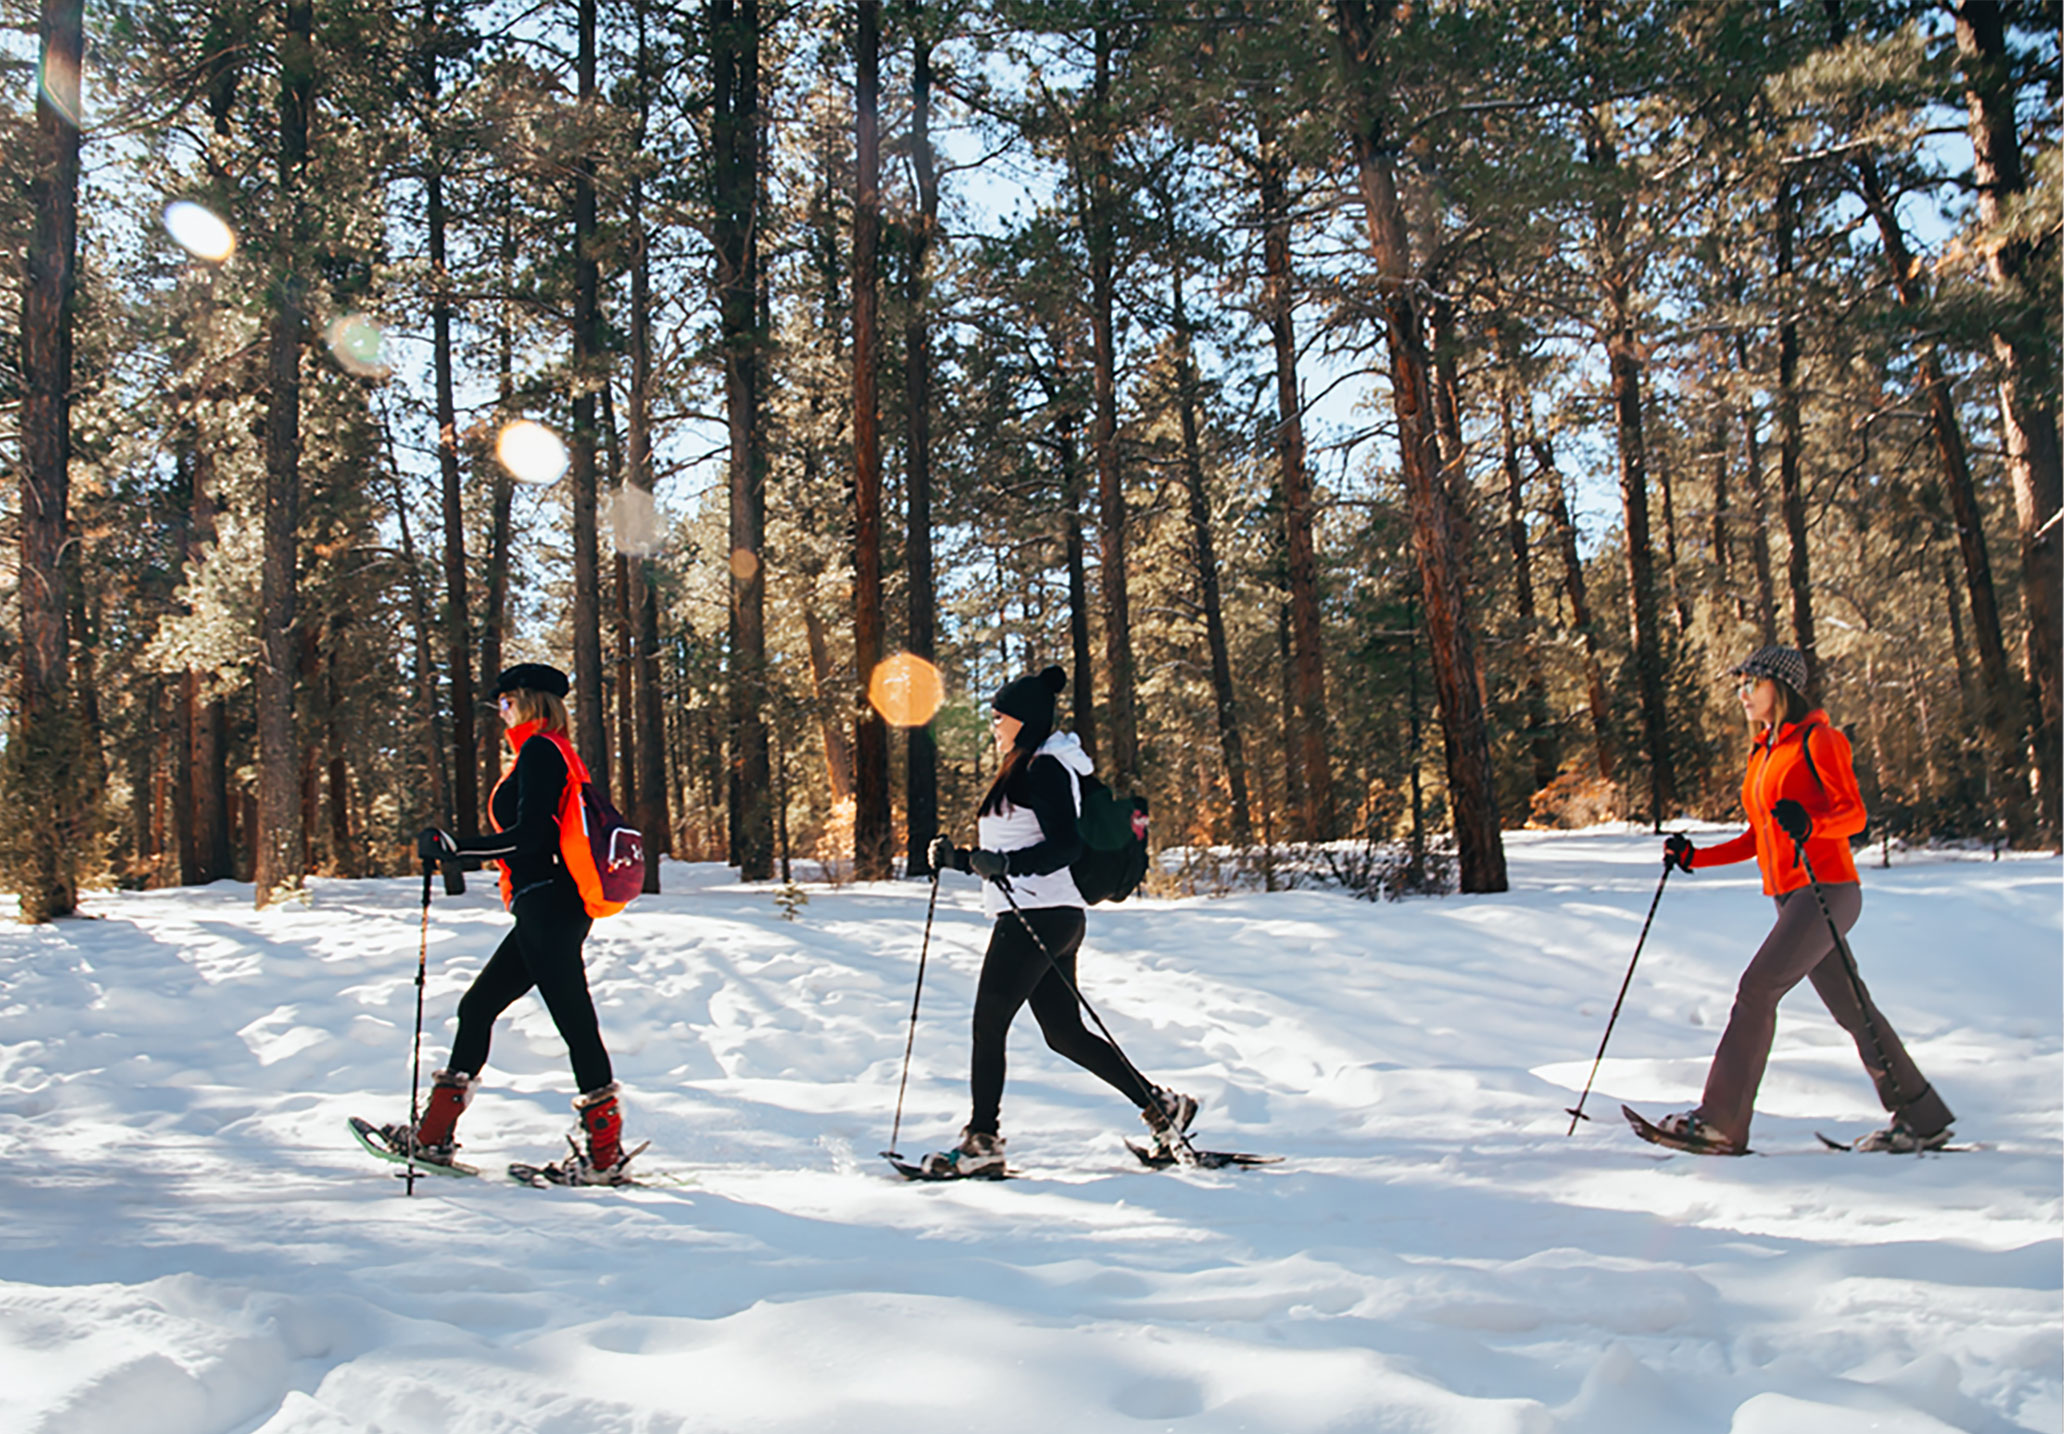 Snowshoe guests in Taos, New Mexico.